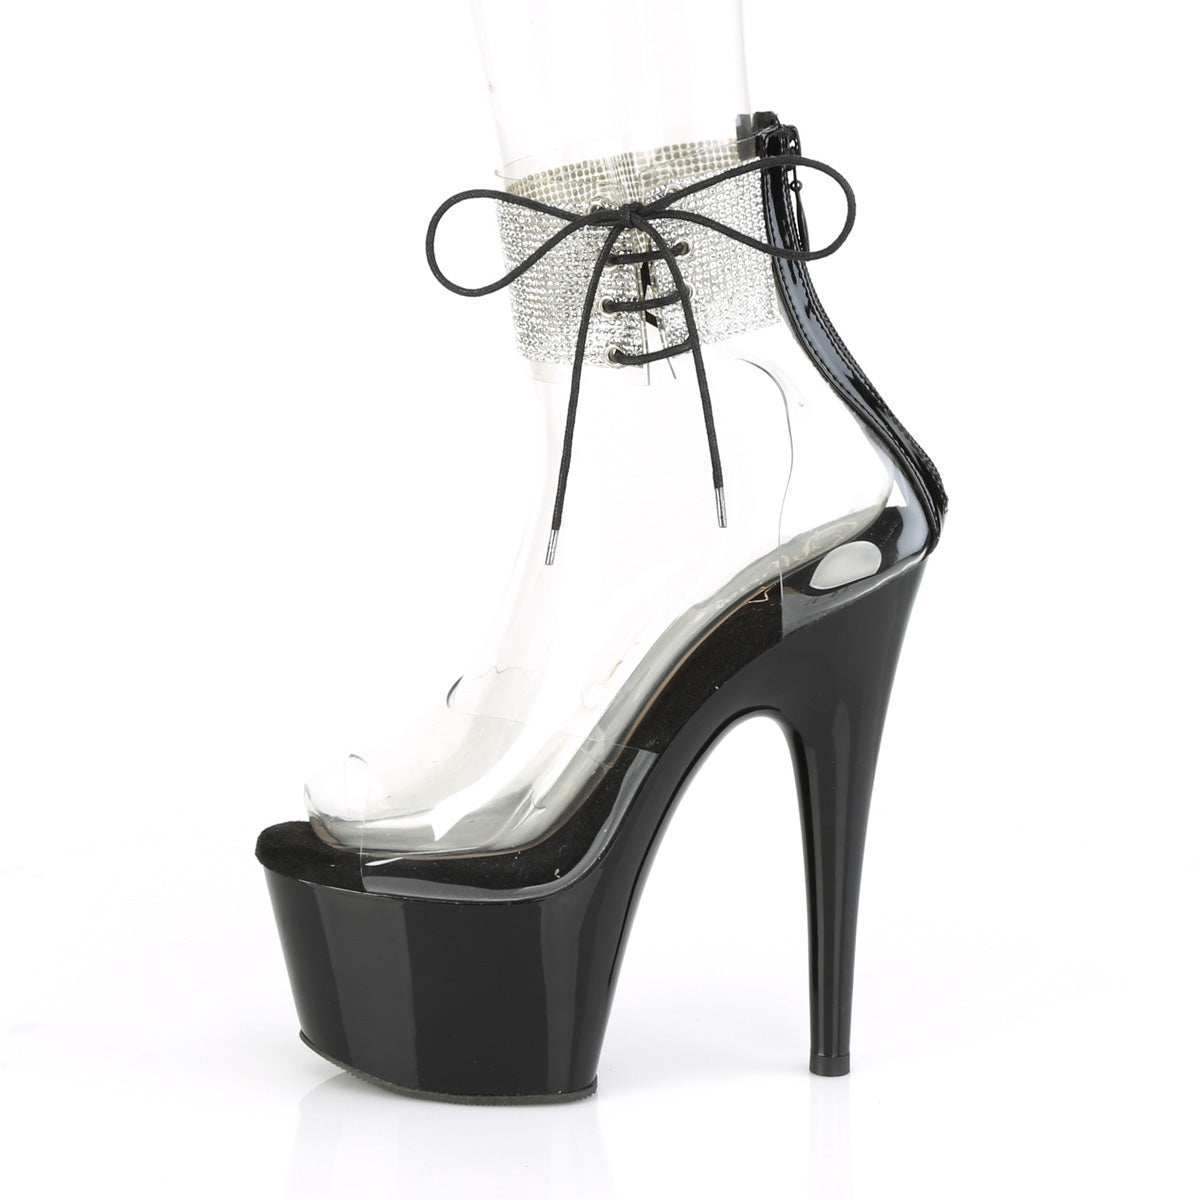 ADORE-724RS Pleaser Pole Dancing Shoes 7 Inch Heel Pleasers - Sexy Shoes Pole Dance Heels